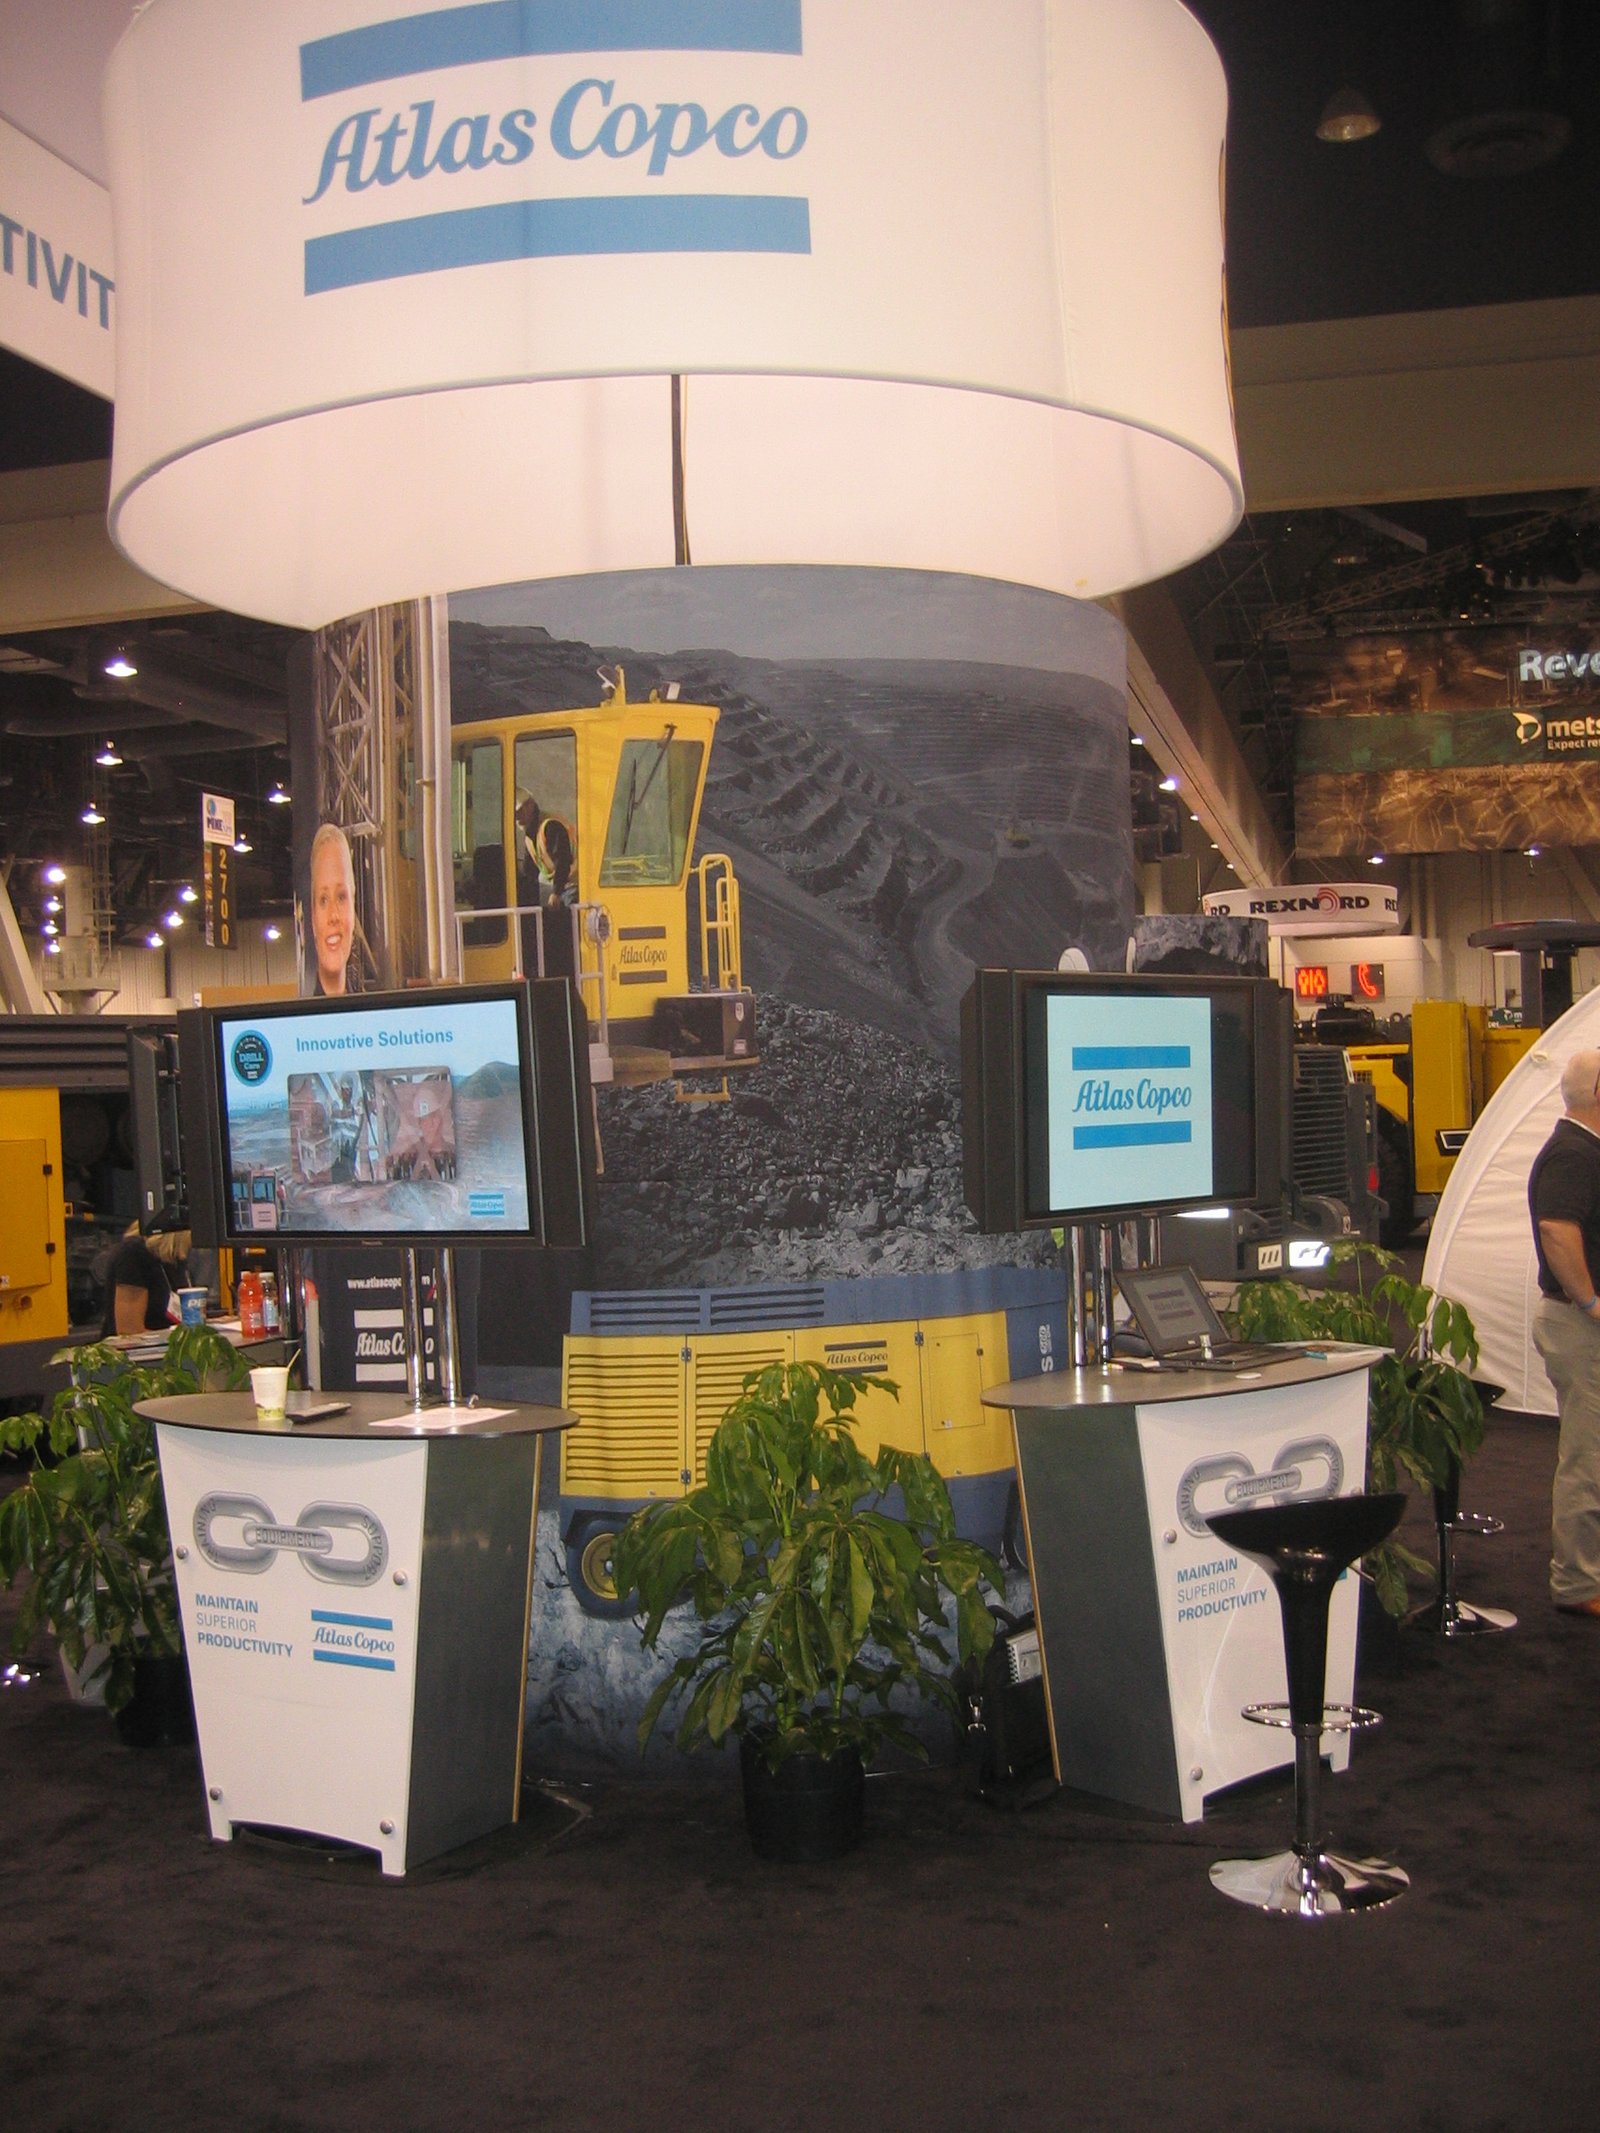 Closeup of Atlas Copco trade show display with large fabric cylinder printed with images of a large mine and trucks carrying ore. There is a white ring above this with an Atlas Copco teal logo.